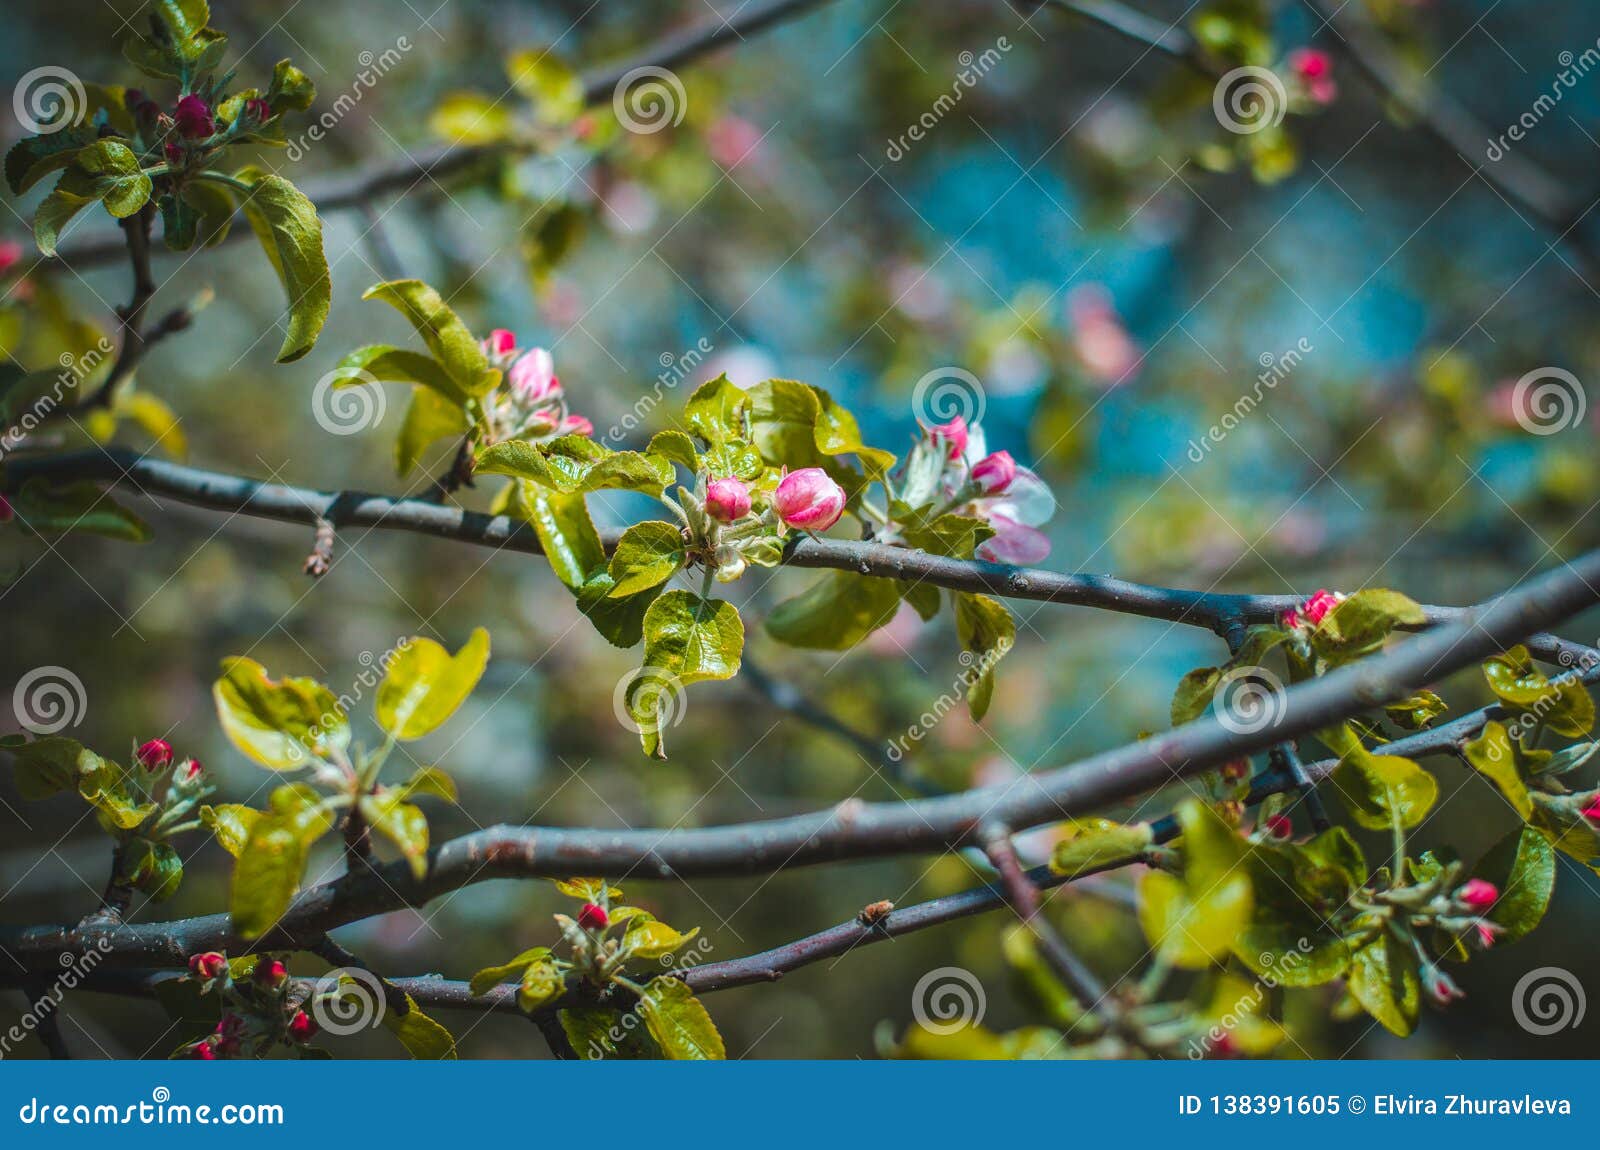 florescence of apple tree in the garden close-up spring shot